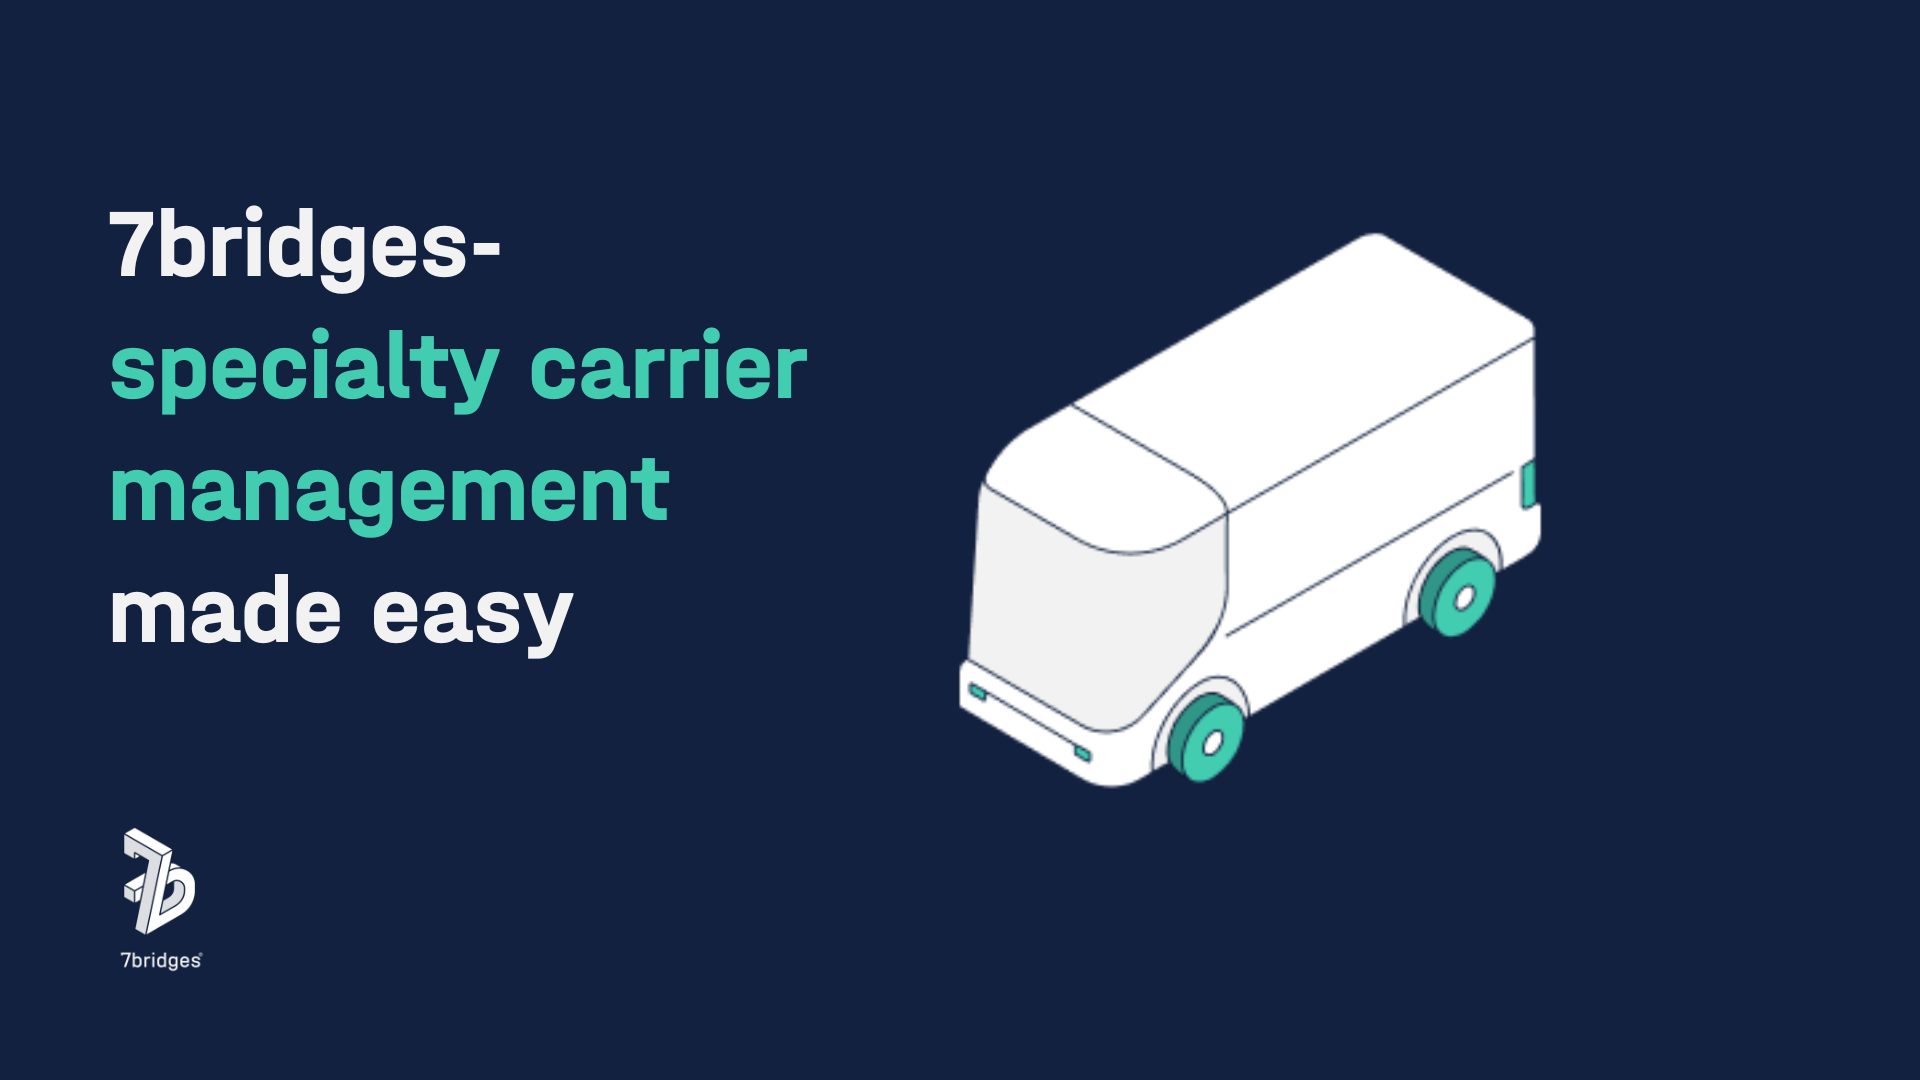 Specialty carrier management made easy on a dark blue background with an isometric style delivery truck to the right